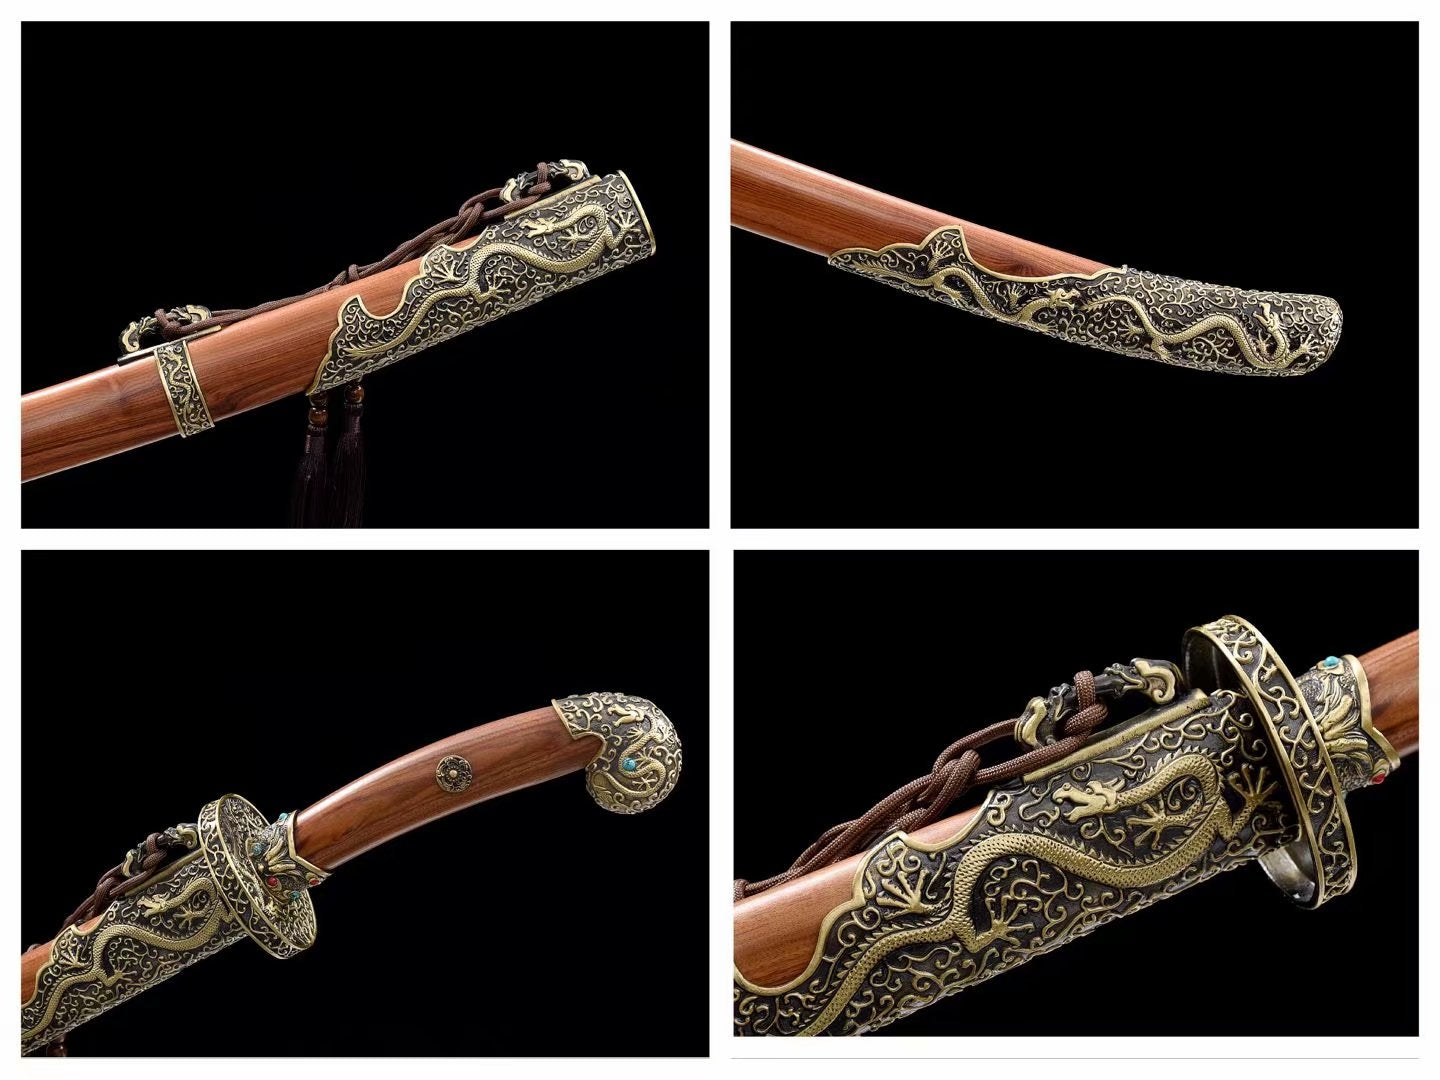 Dragon qing dao,Forged damascus steel turn blade,Brass fittings - Chinese sword shop